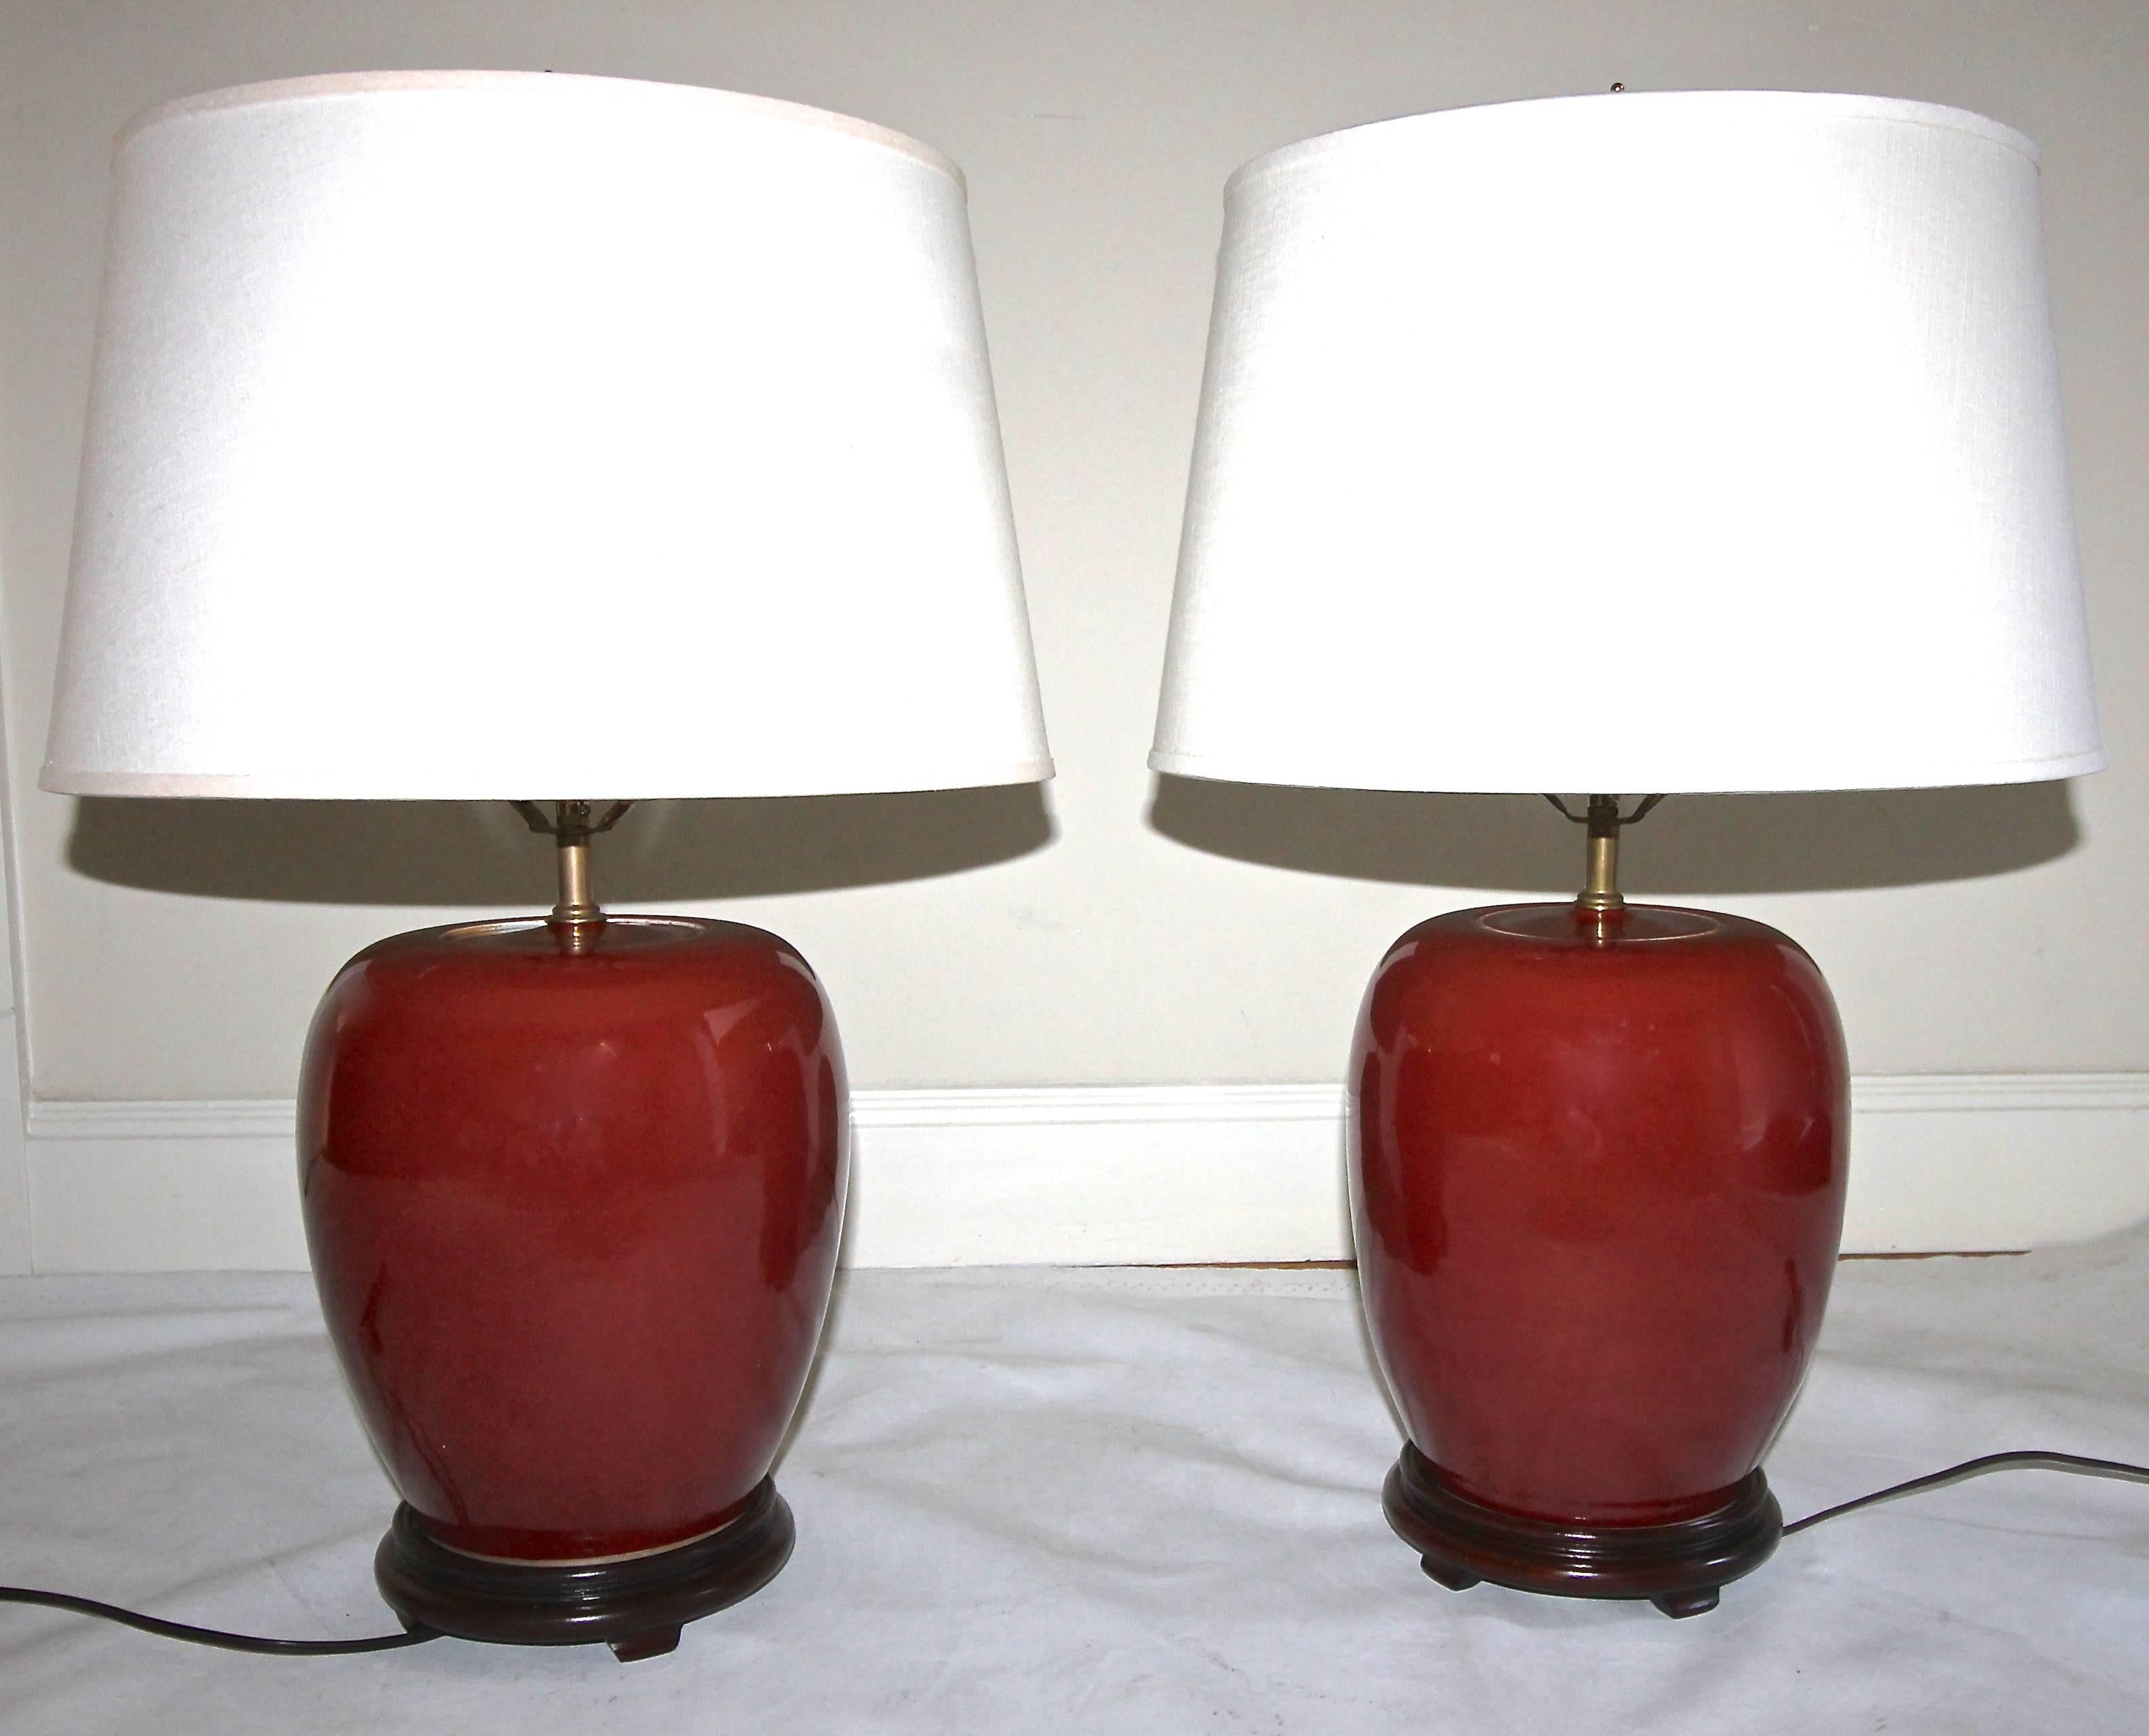 Pair of beautiful Chinese Oxblood porcelain vases mounted on wood lamp bases. Lamps include shades and finials. Height to socket (without shade) 18